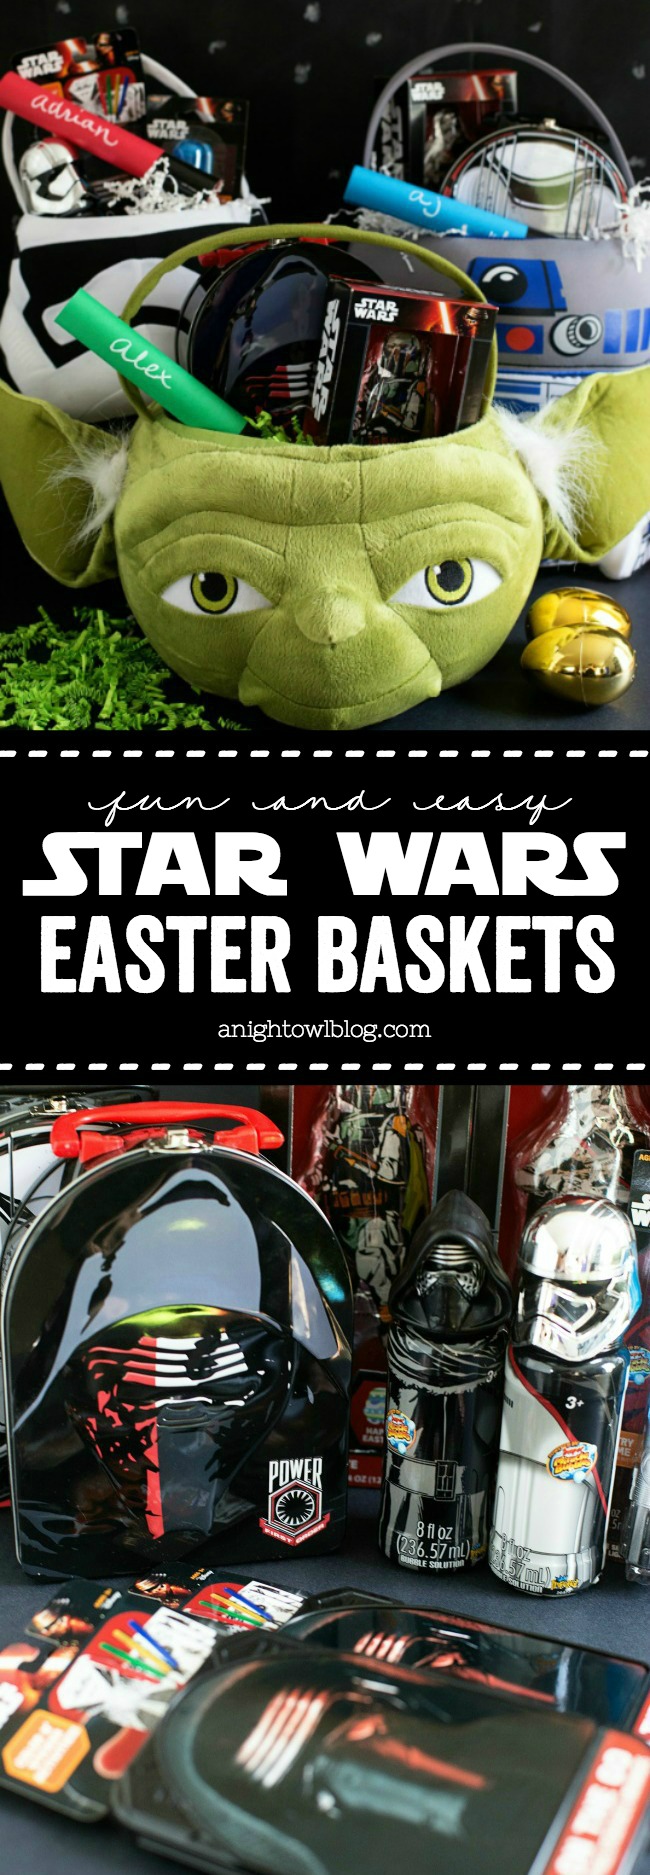 NEW 2016 STAR WARS 24" YODA BASKET w/8" OPEN NWT PERFECT FOR EASTER! 